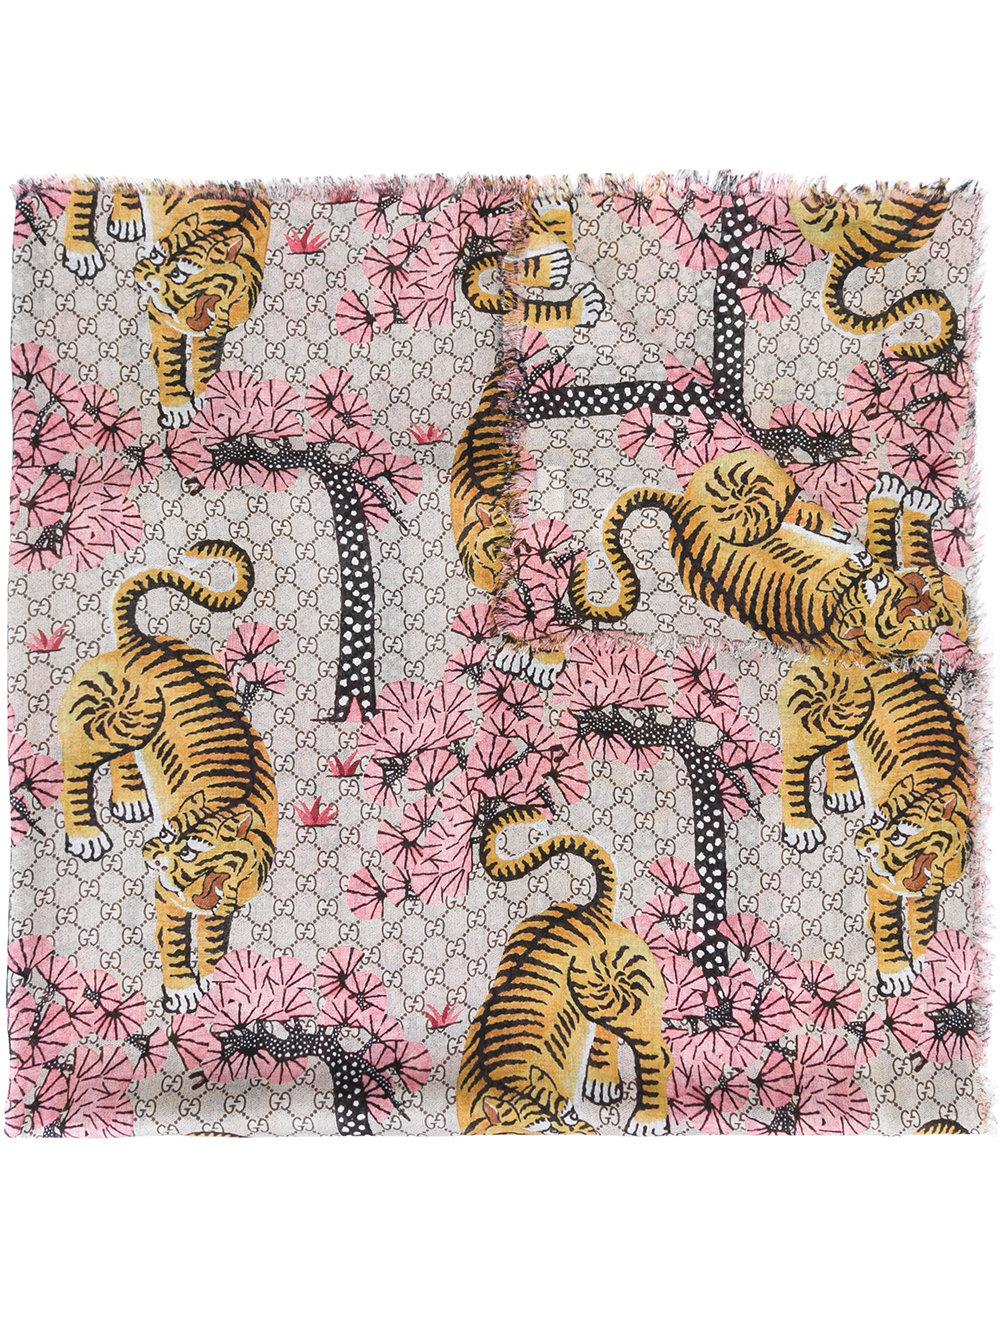 Lyst - Gucci Silk Scarf With Gg Flora Print in Yellow